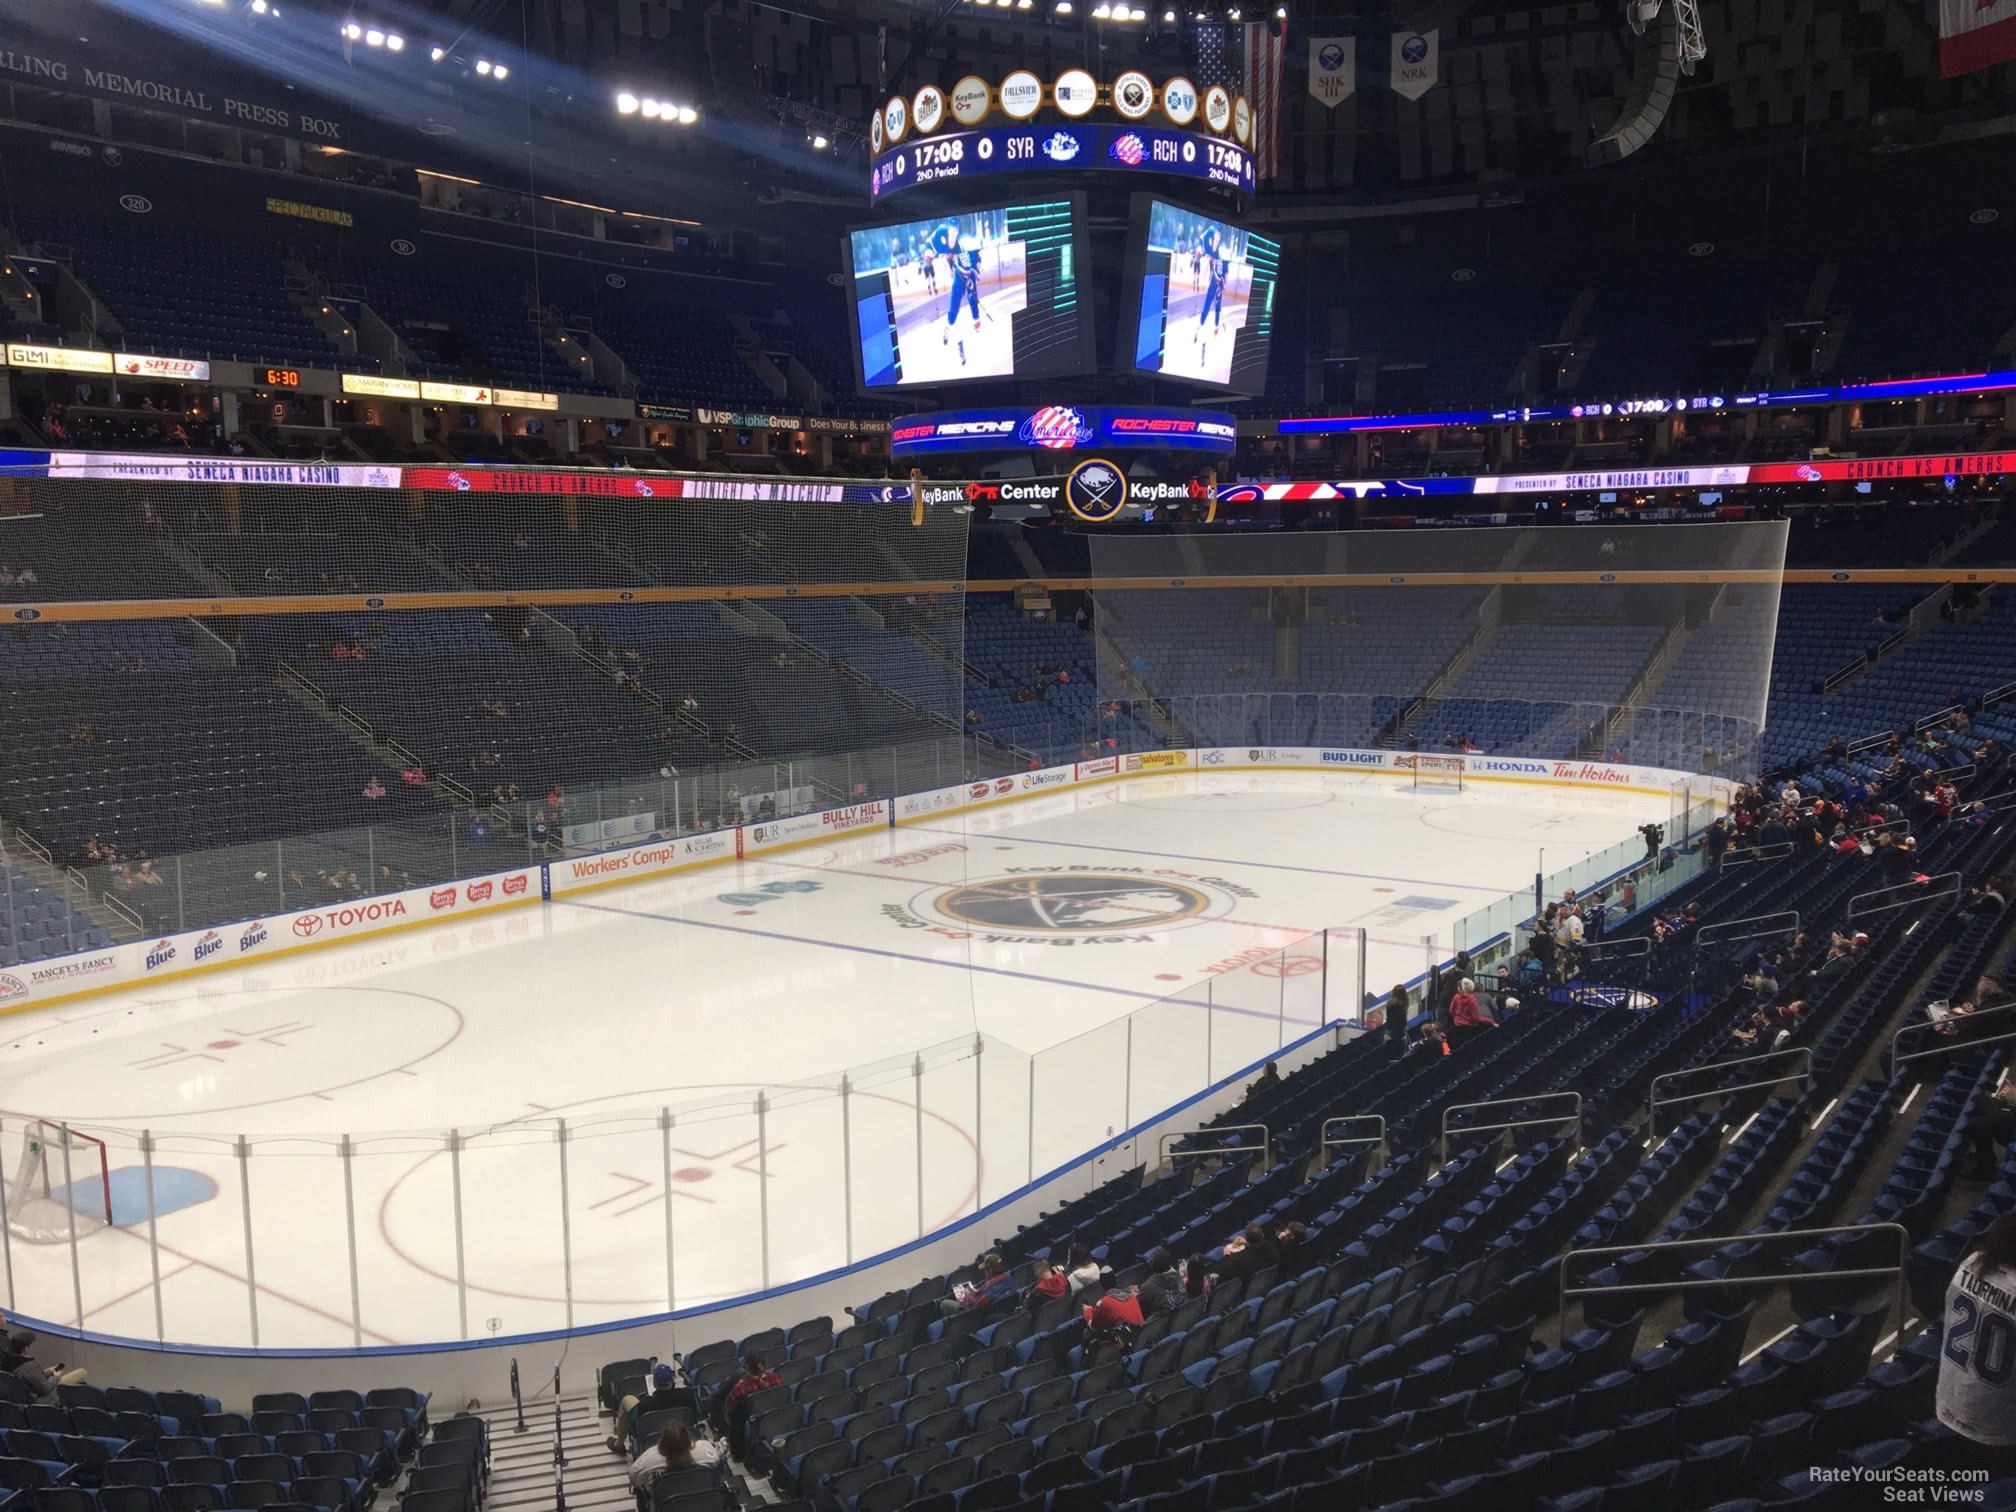 Section 212 at KeyBank Center - RateYourSeats.com